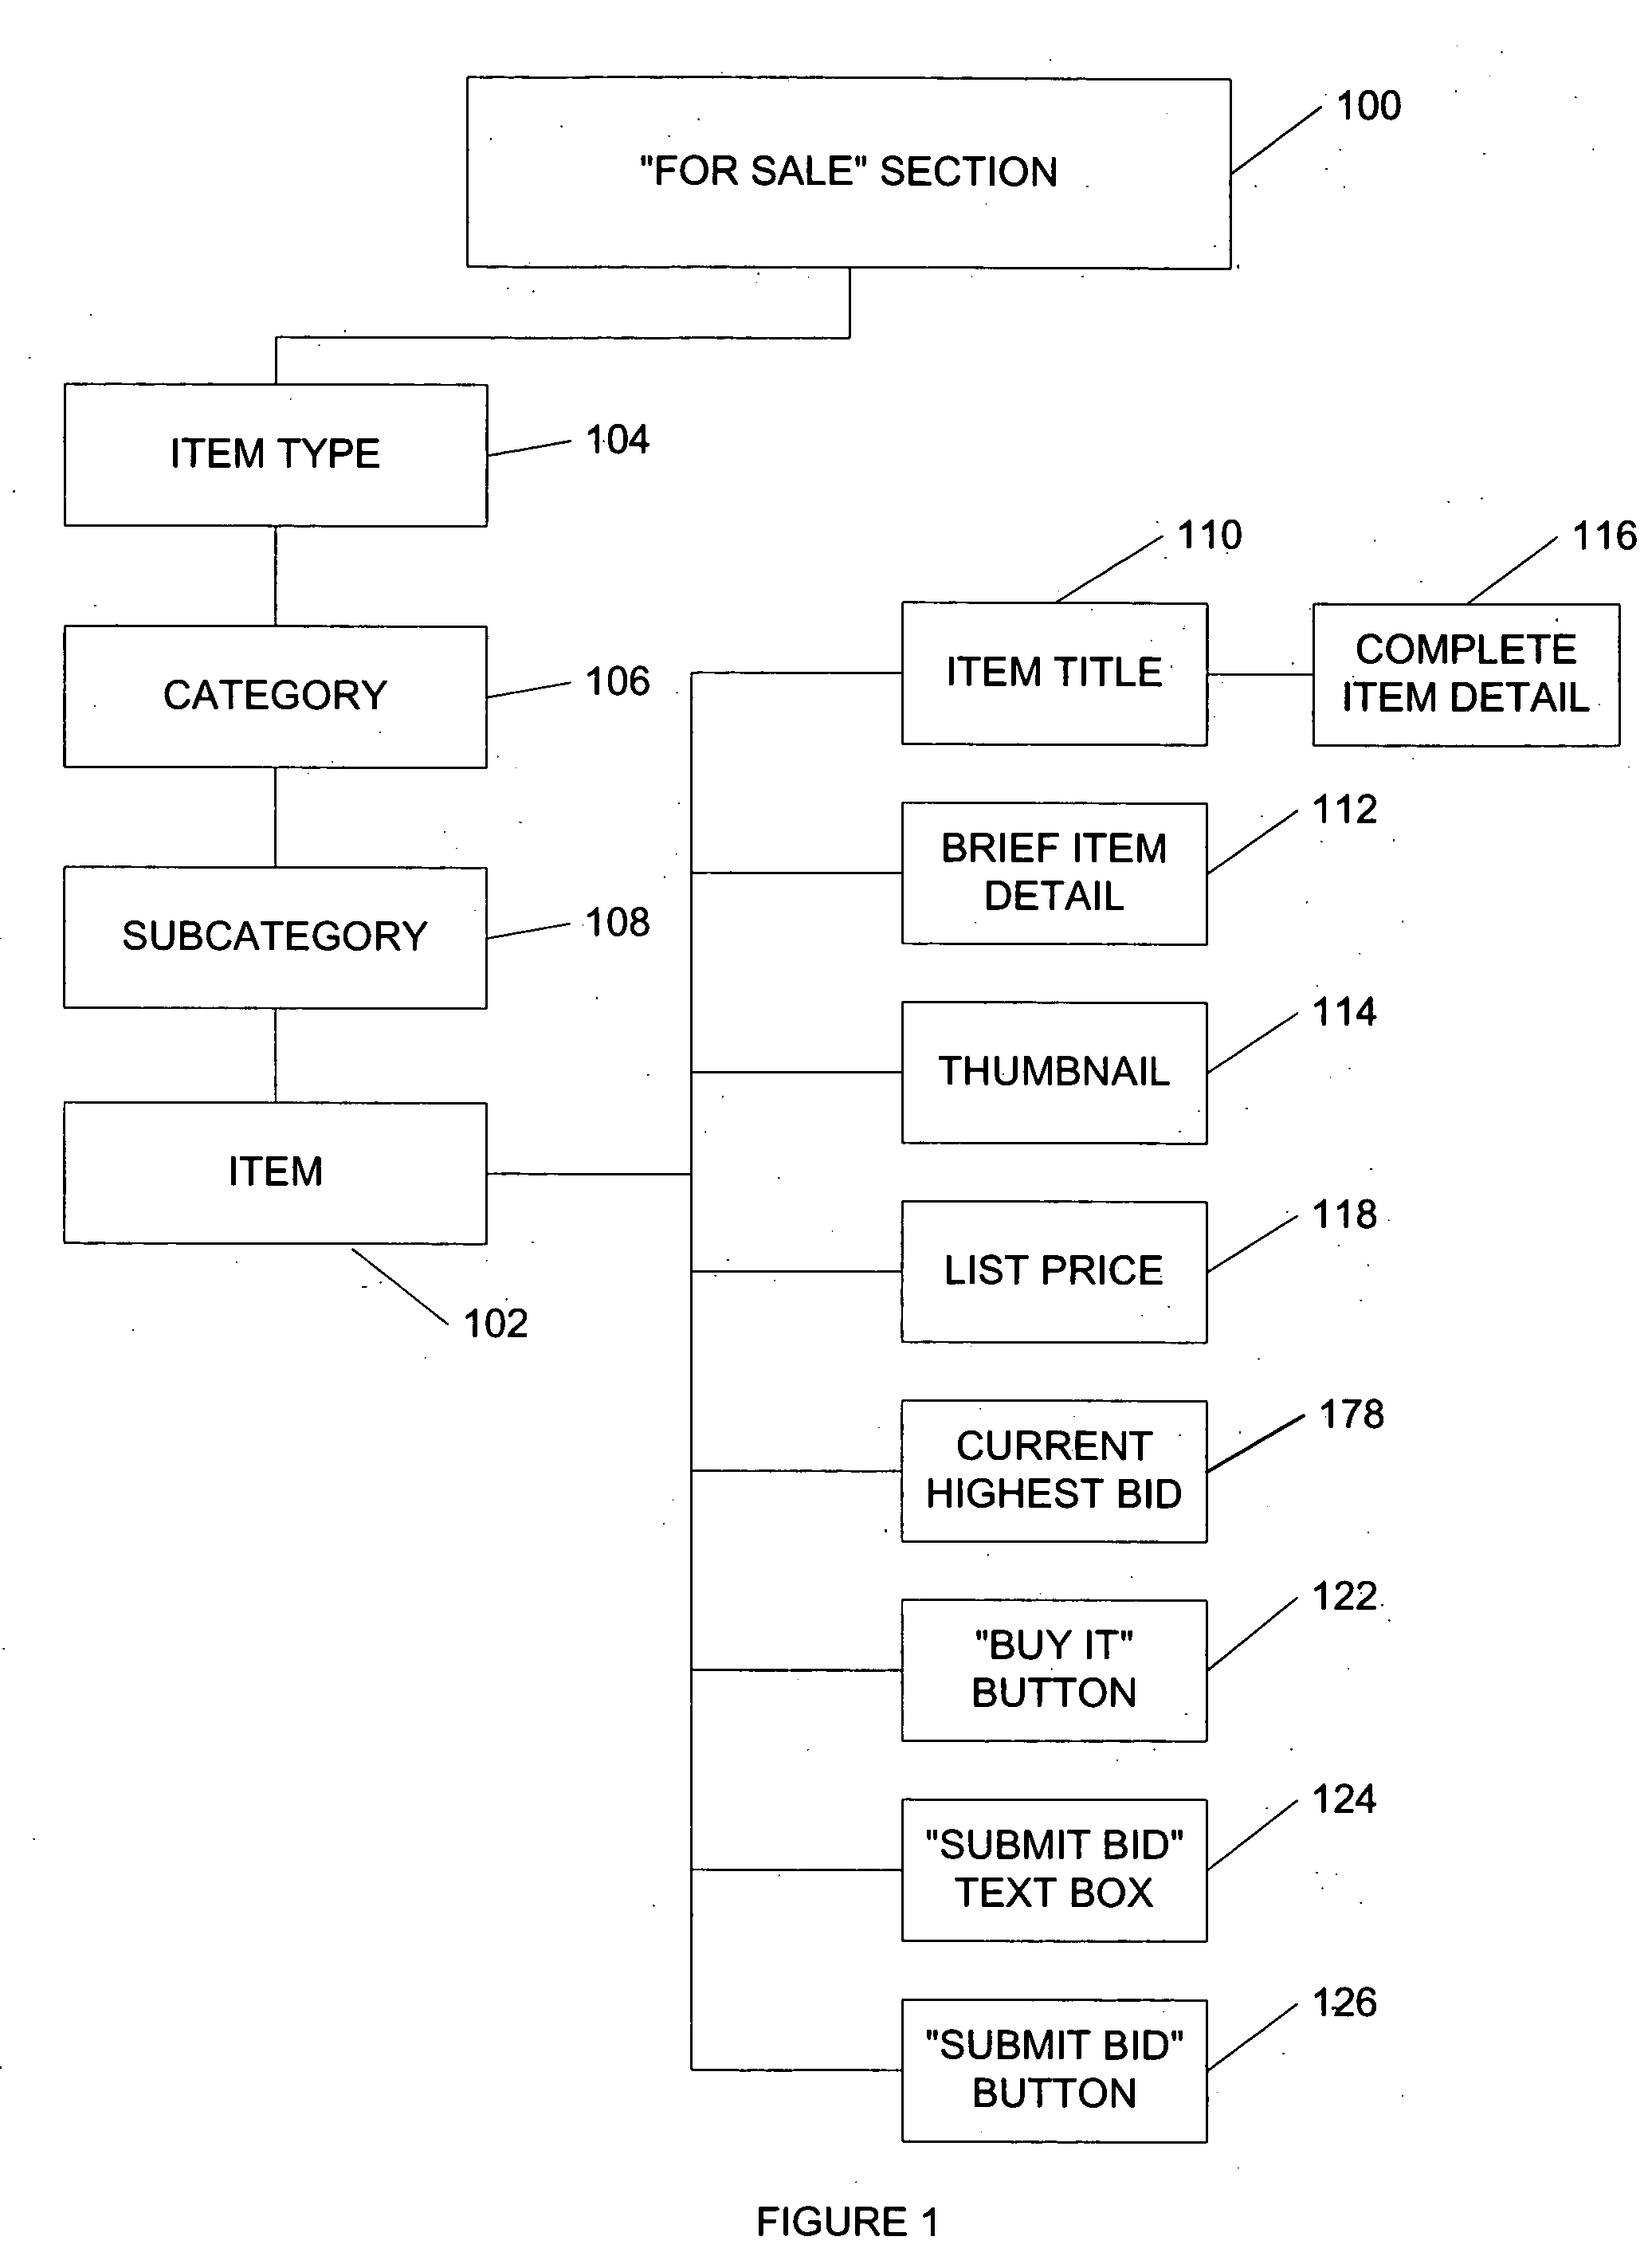 System and method for an automated sales system with remote negotiation and post-sale verification